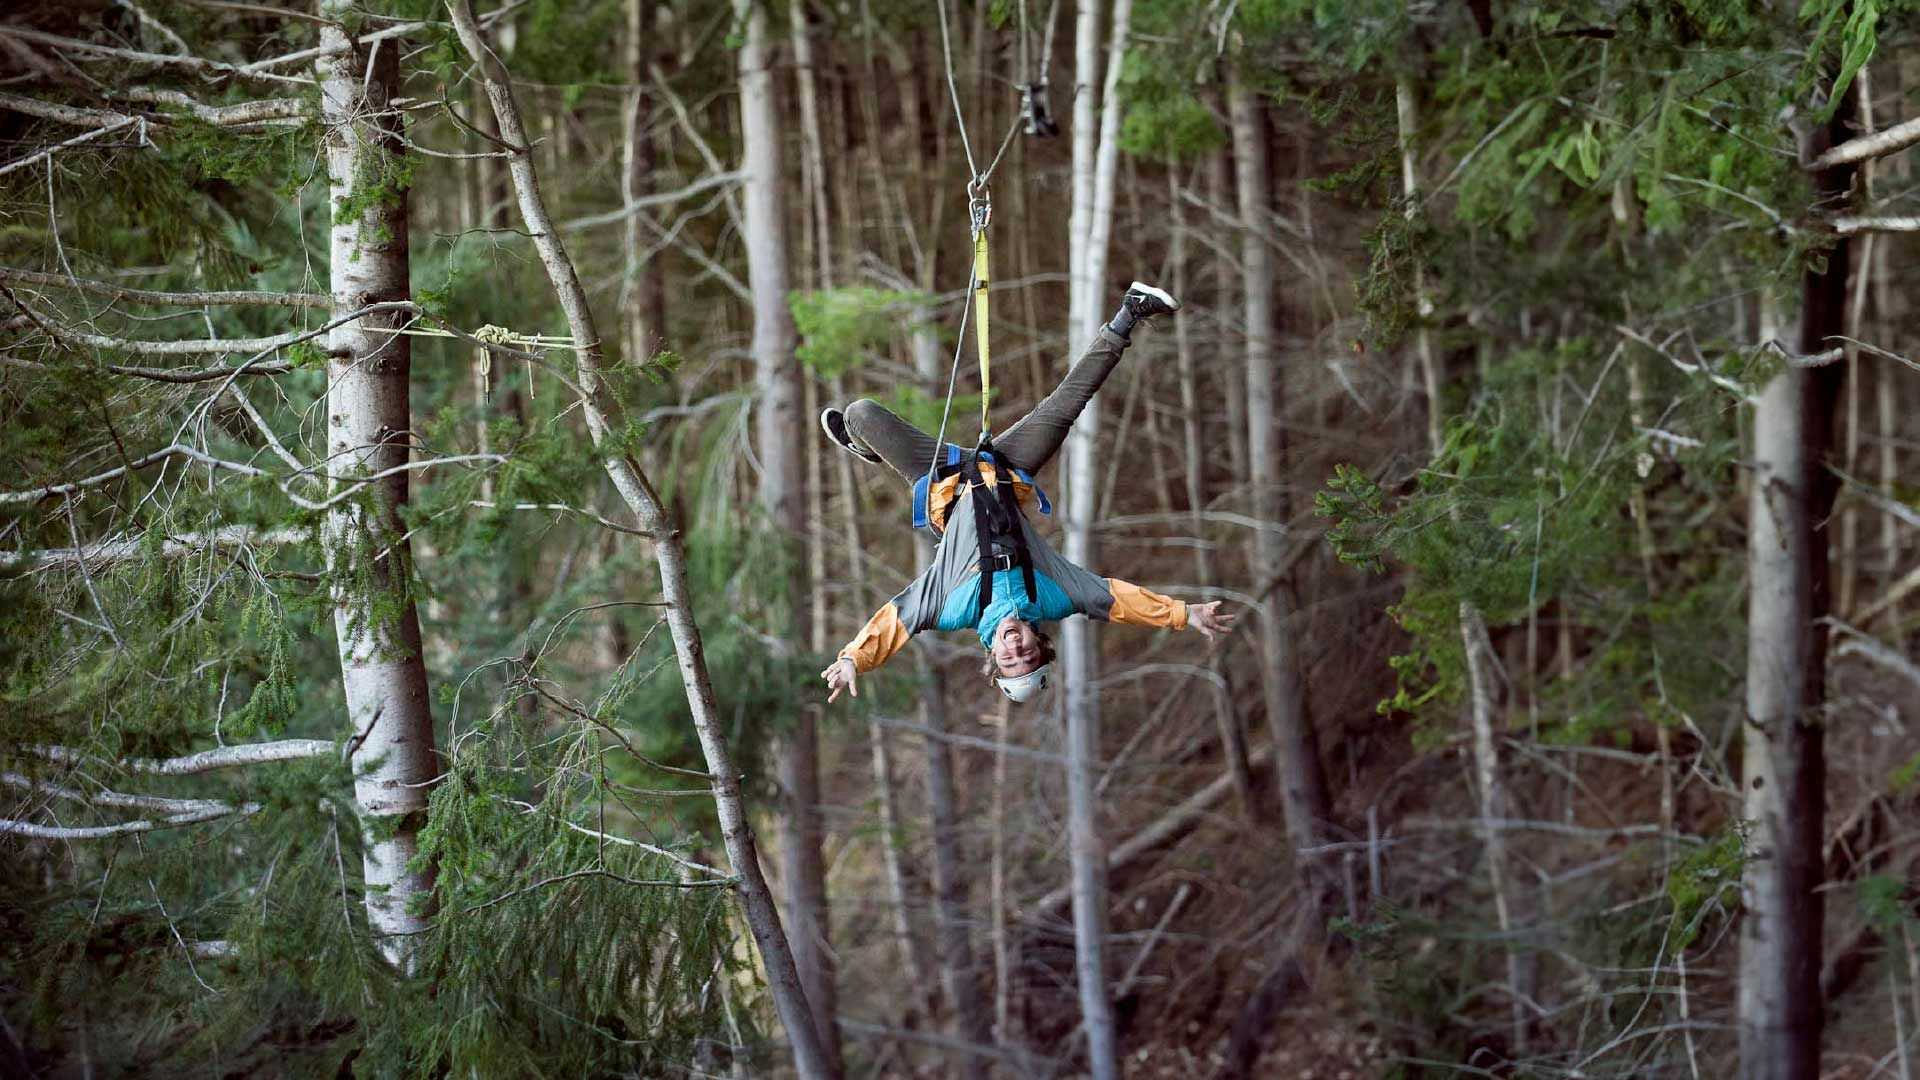 Person hanging upside down on a zipline